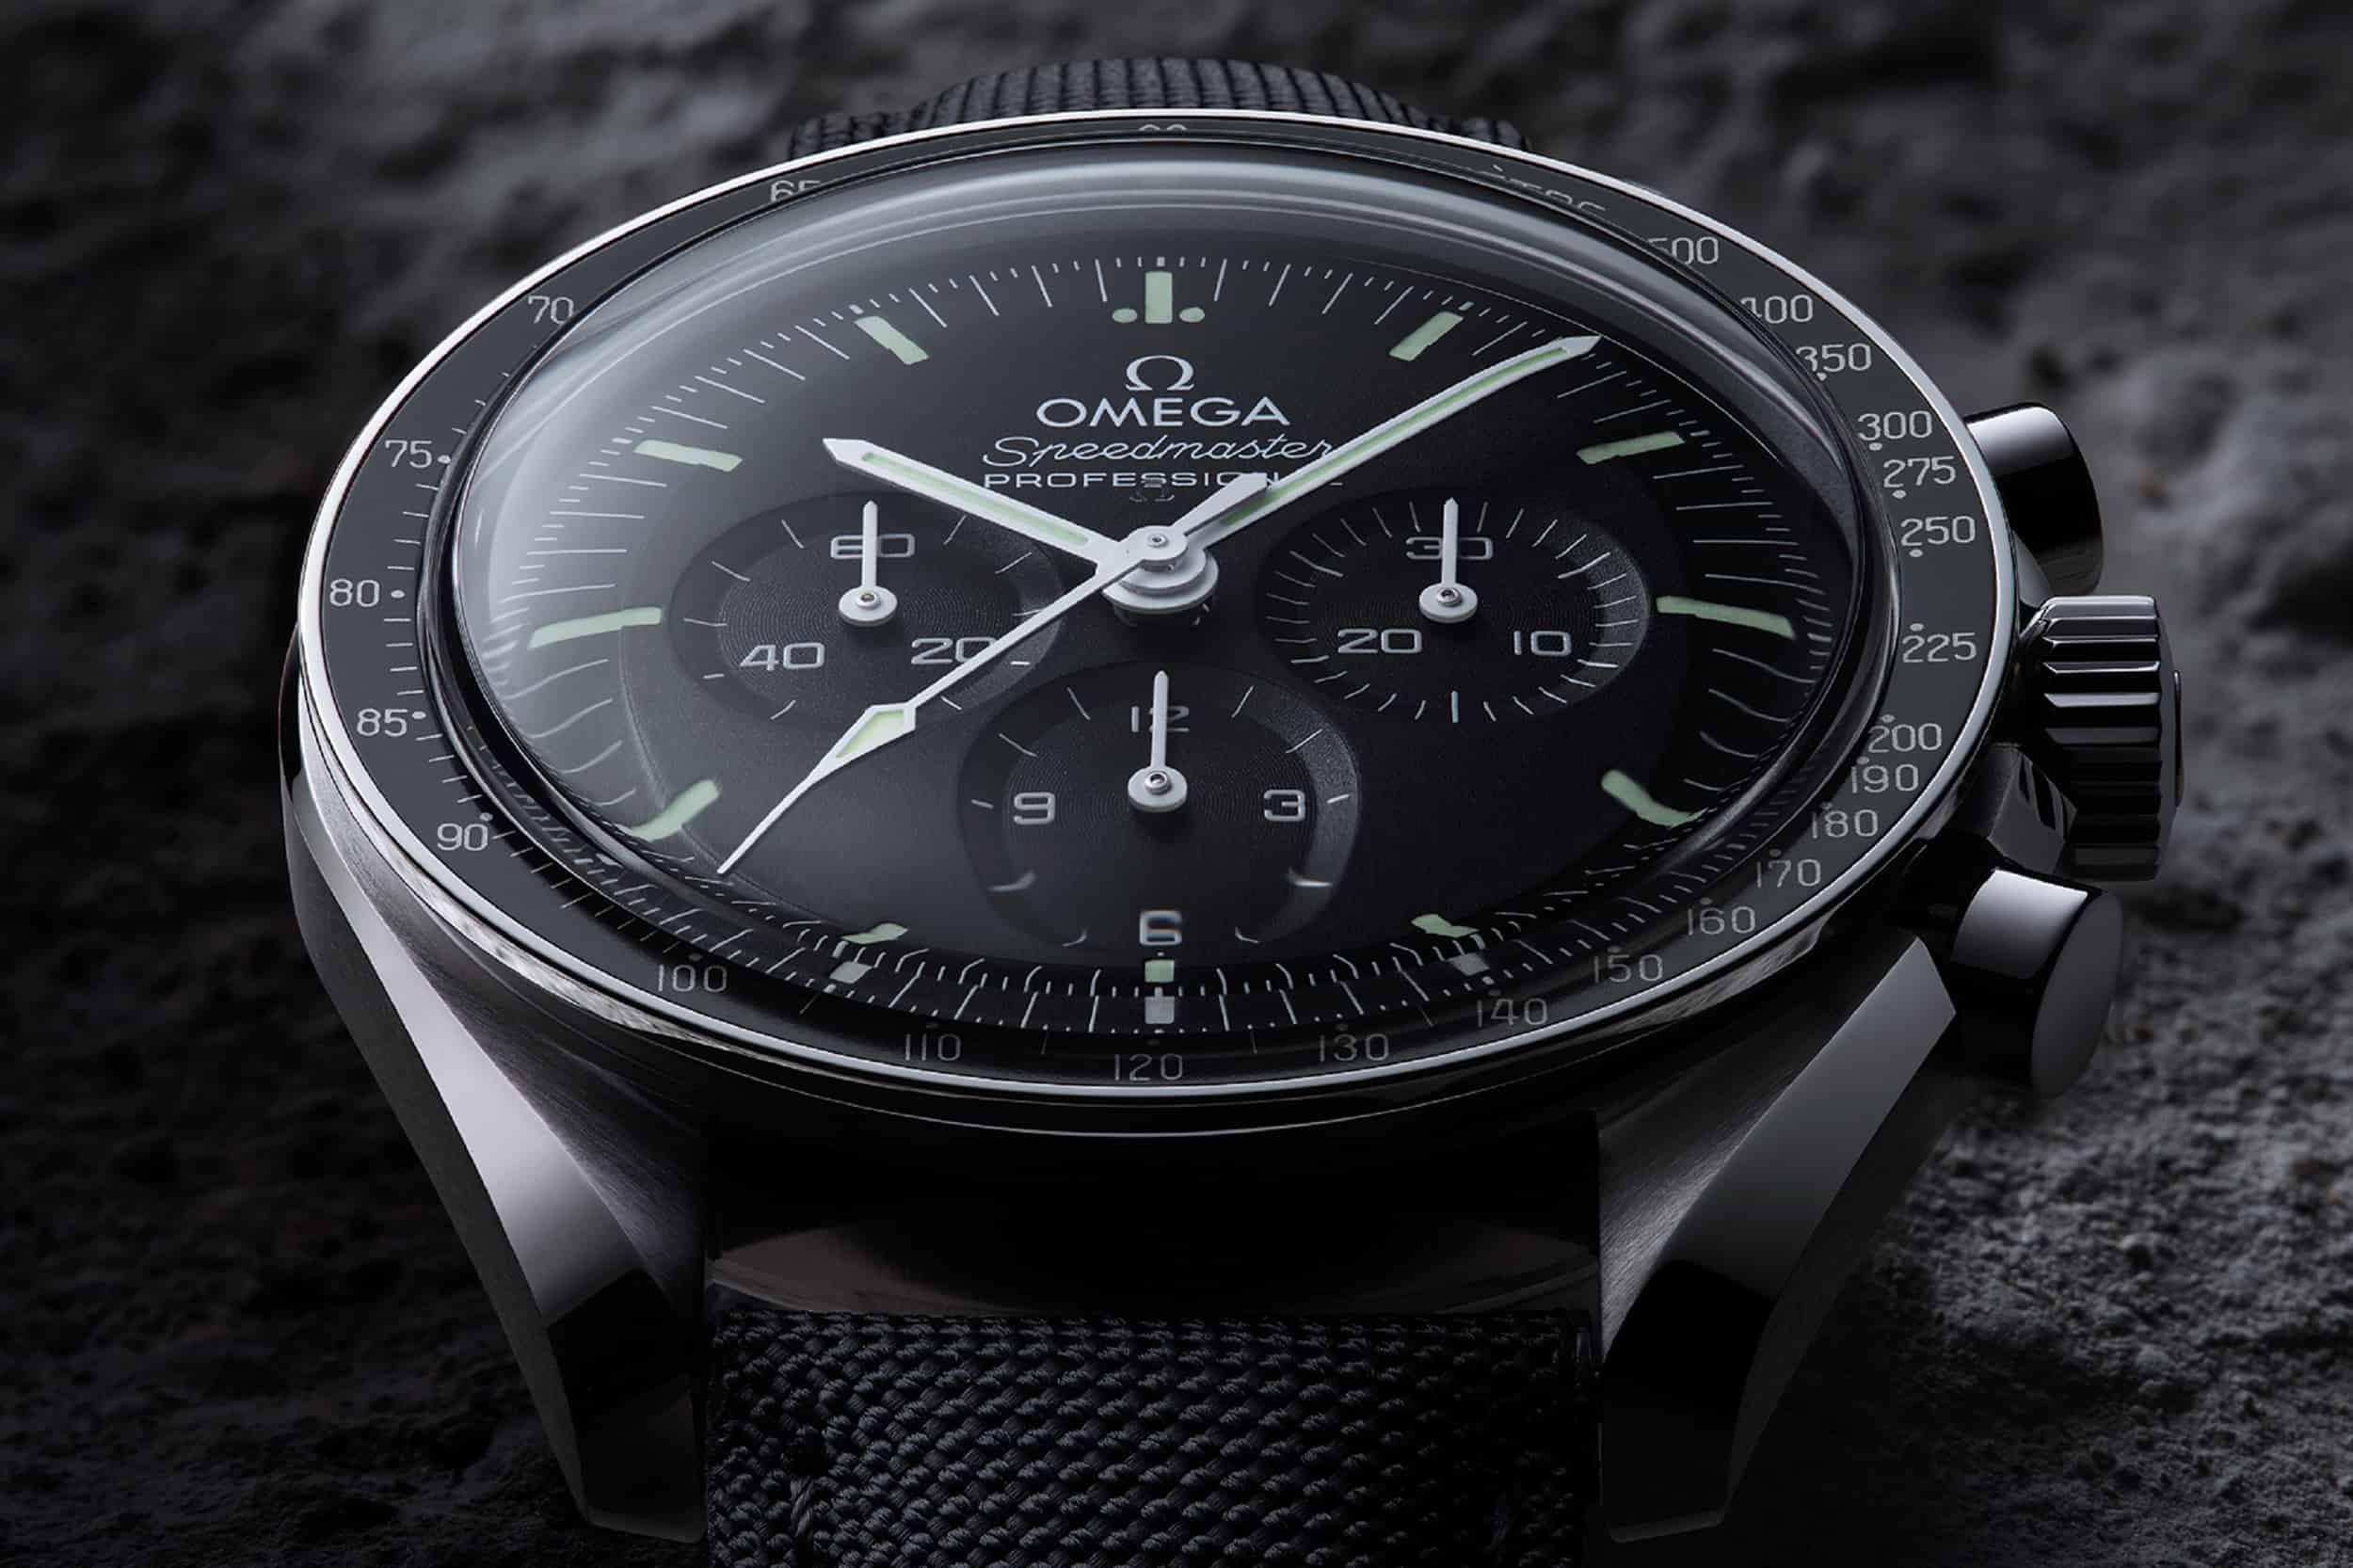 Introducing The New Omega Speedmaster with Caliber 3861 - Worn & Wound